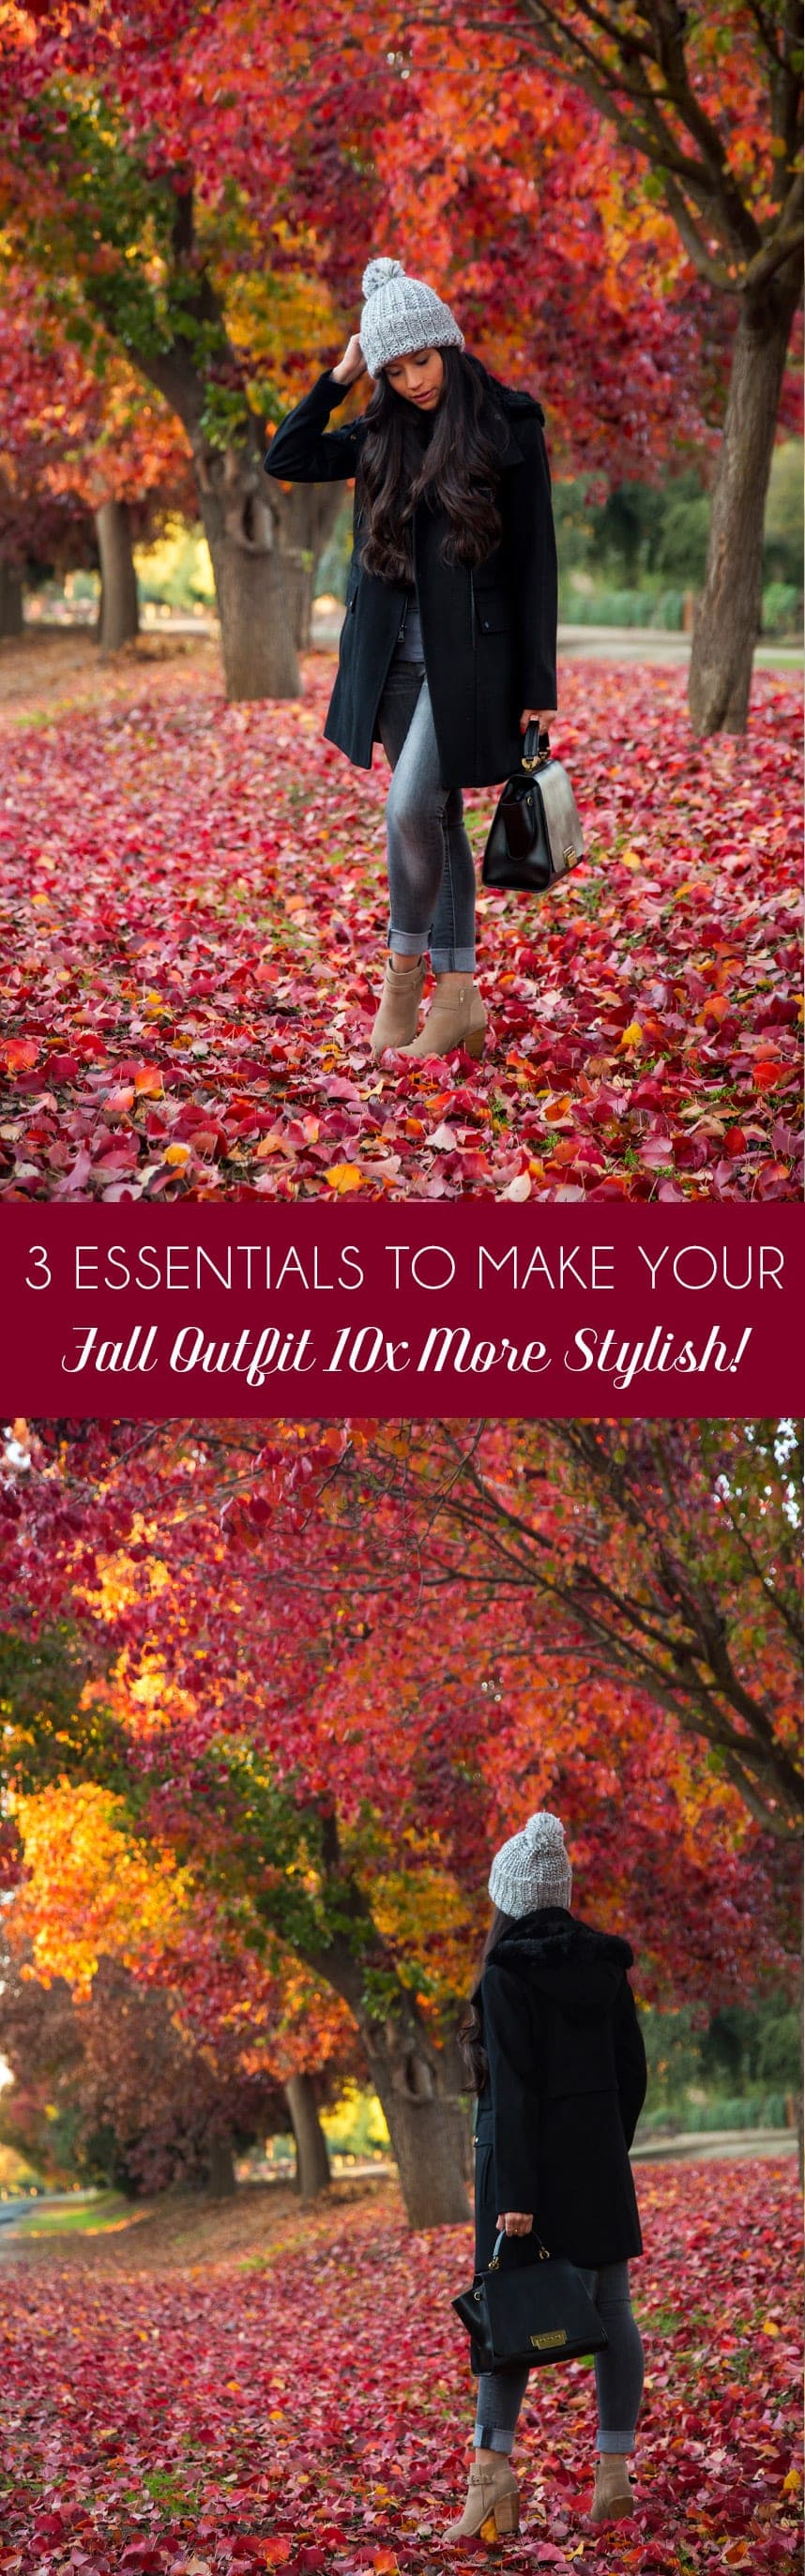 Make You Fall Outfit More Stylish- Visit Stylishlyme.com to view what are the three fall essentials that will make you outfit 10x more stylish